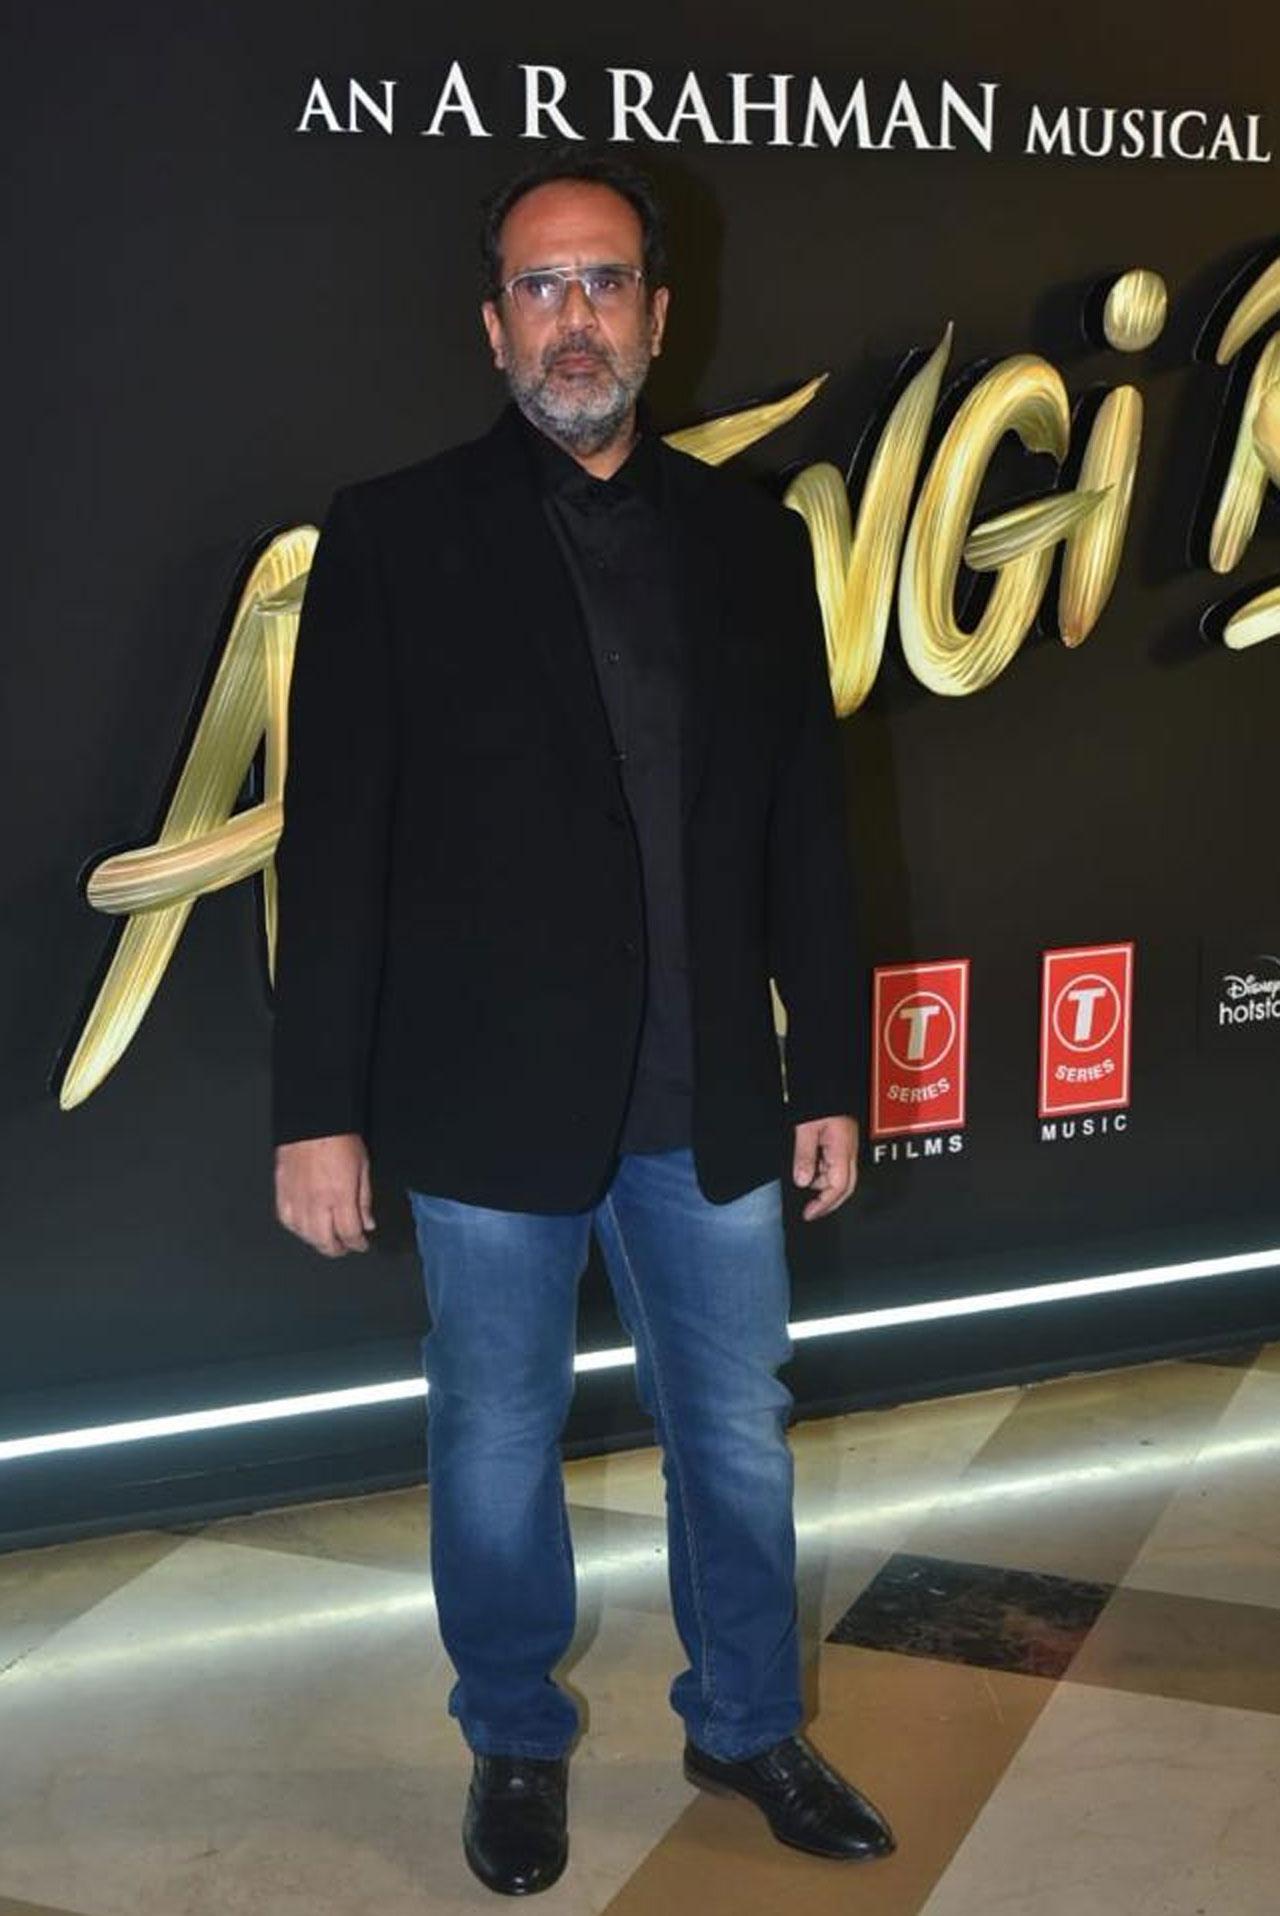 Atrangi filmmaker Aanand L Rai commented on the music album launch and said, 